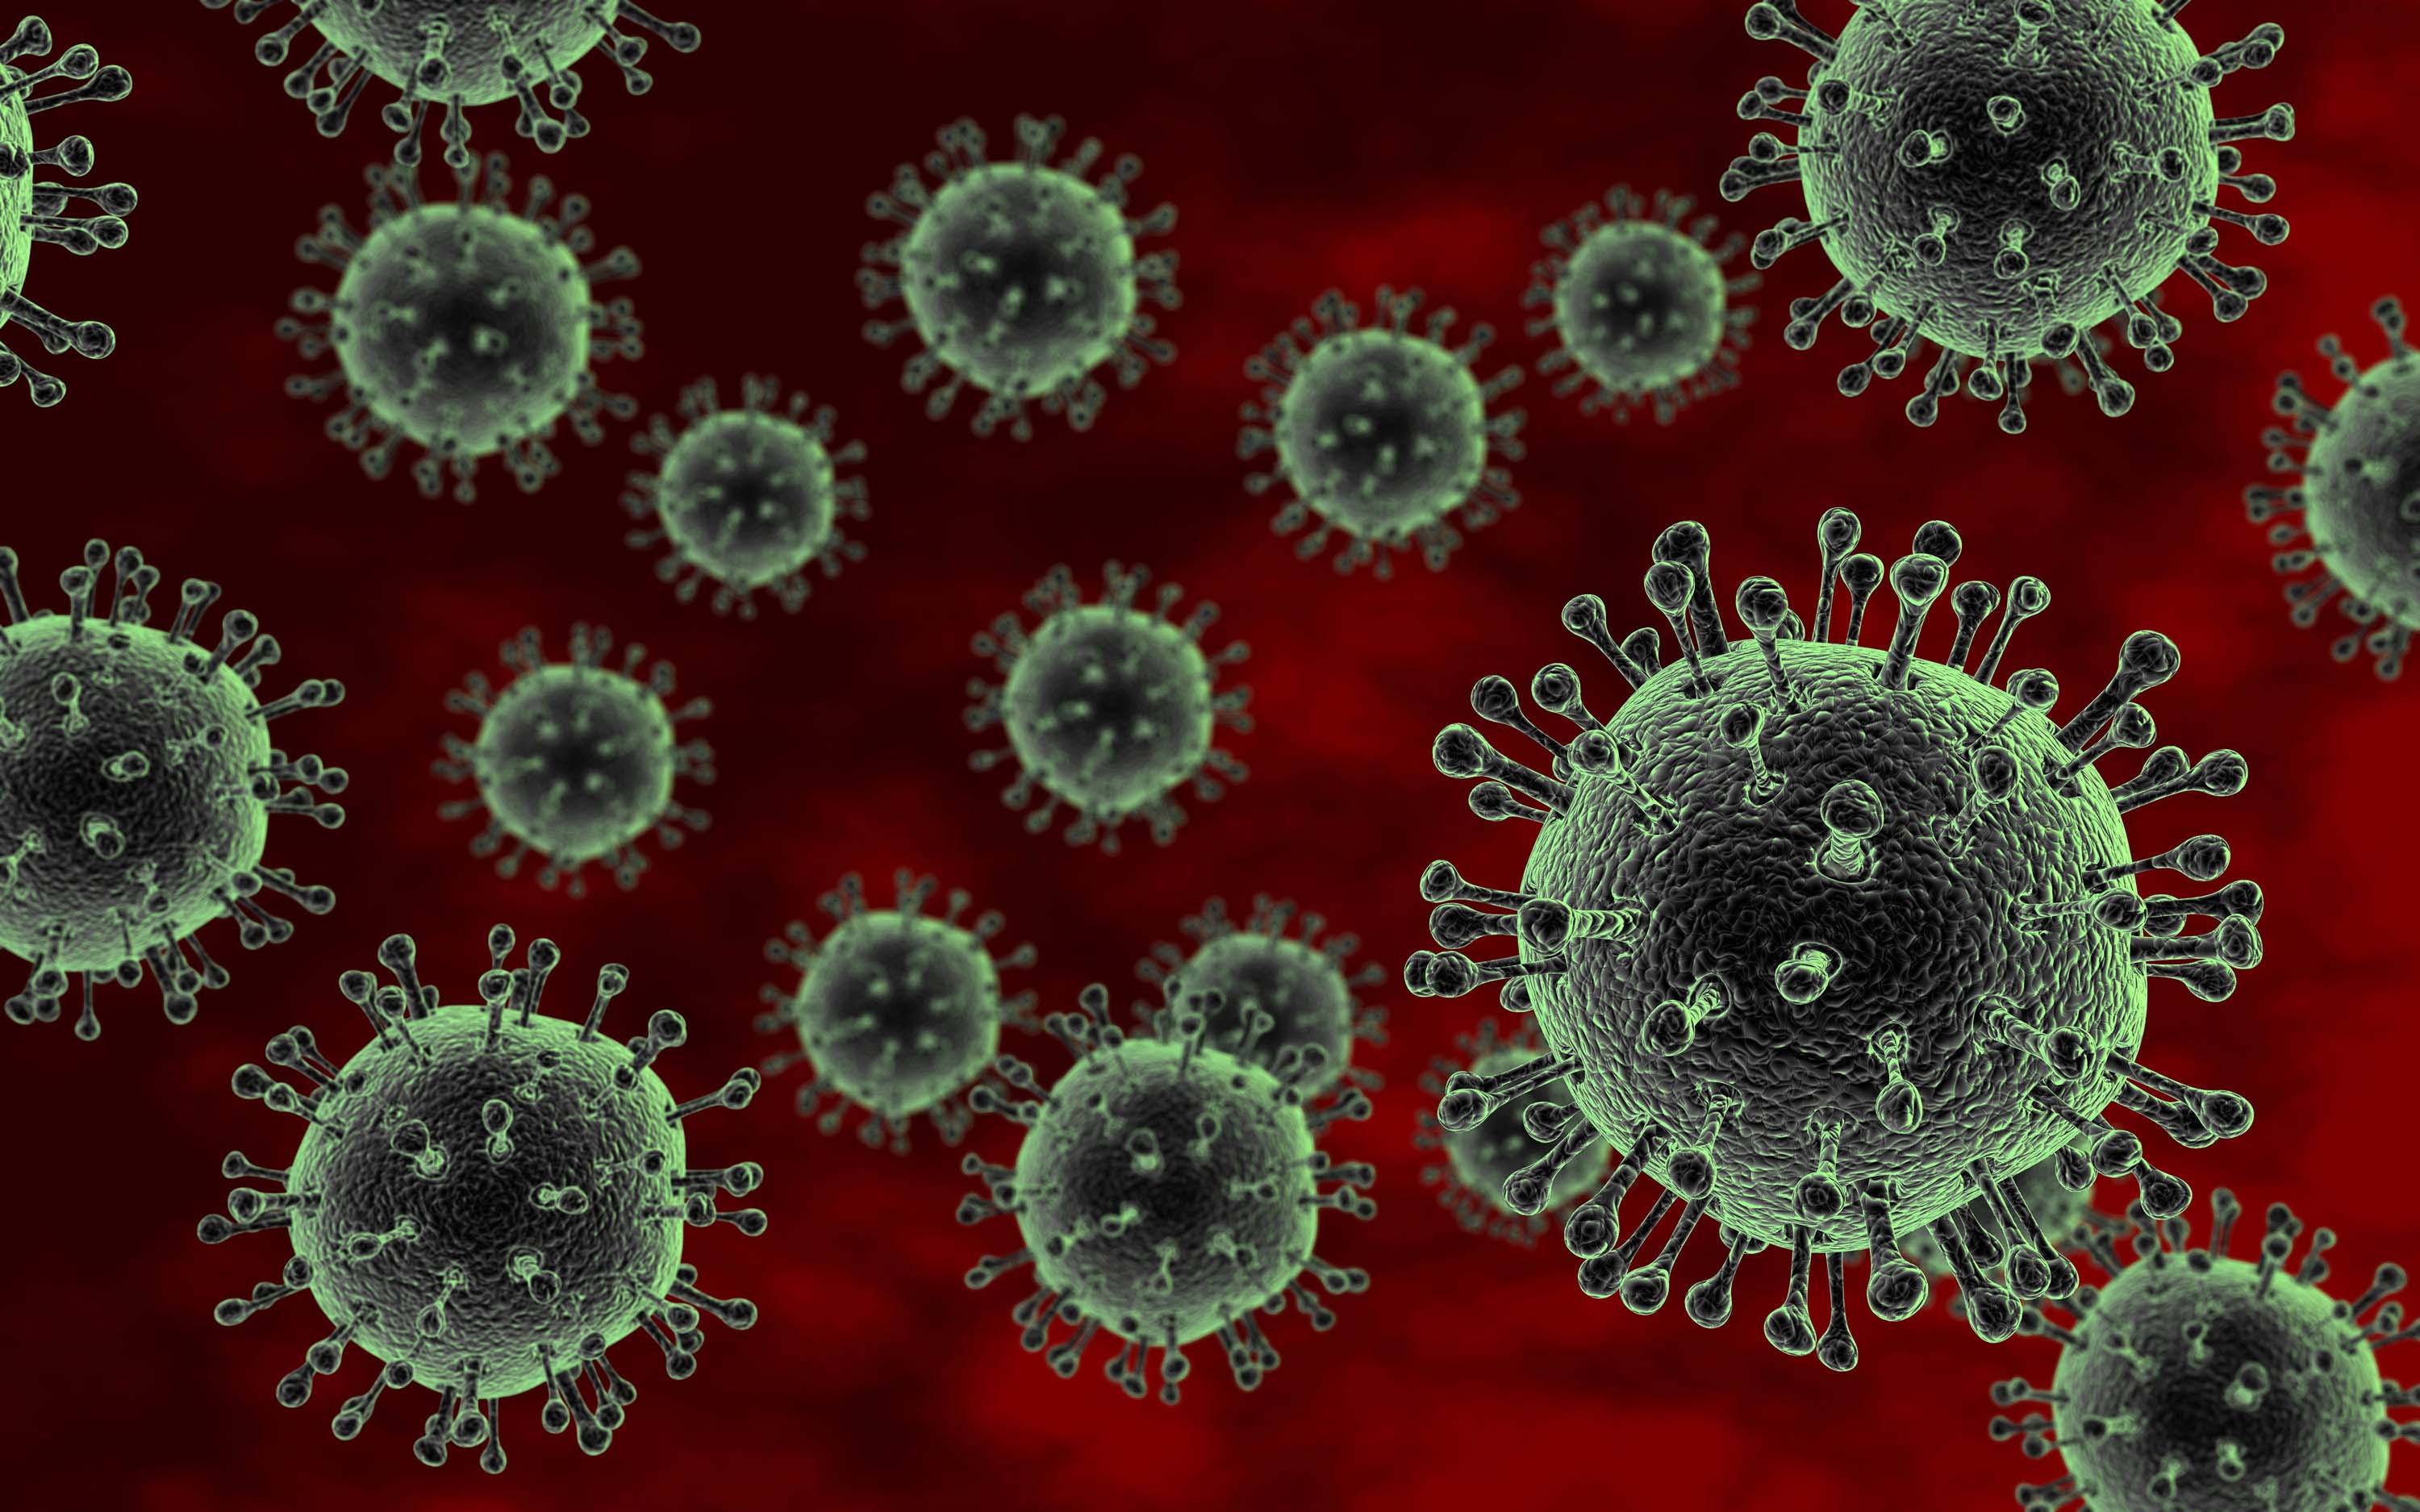 next-pandemic-the-h5n1-bird-flu-virus-could-mutate-to-induce-deadly-human-disease-scientists